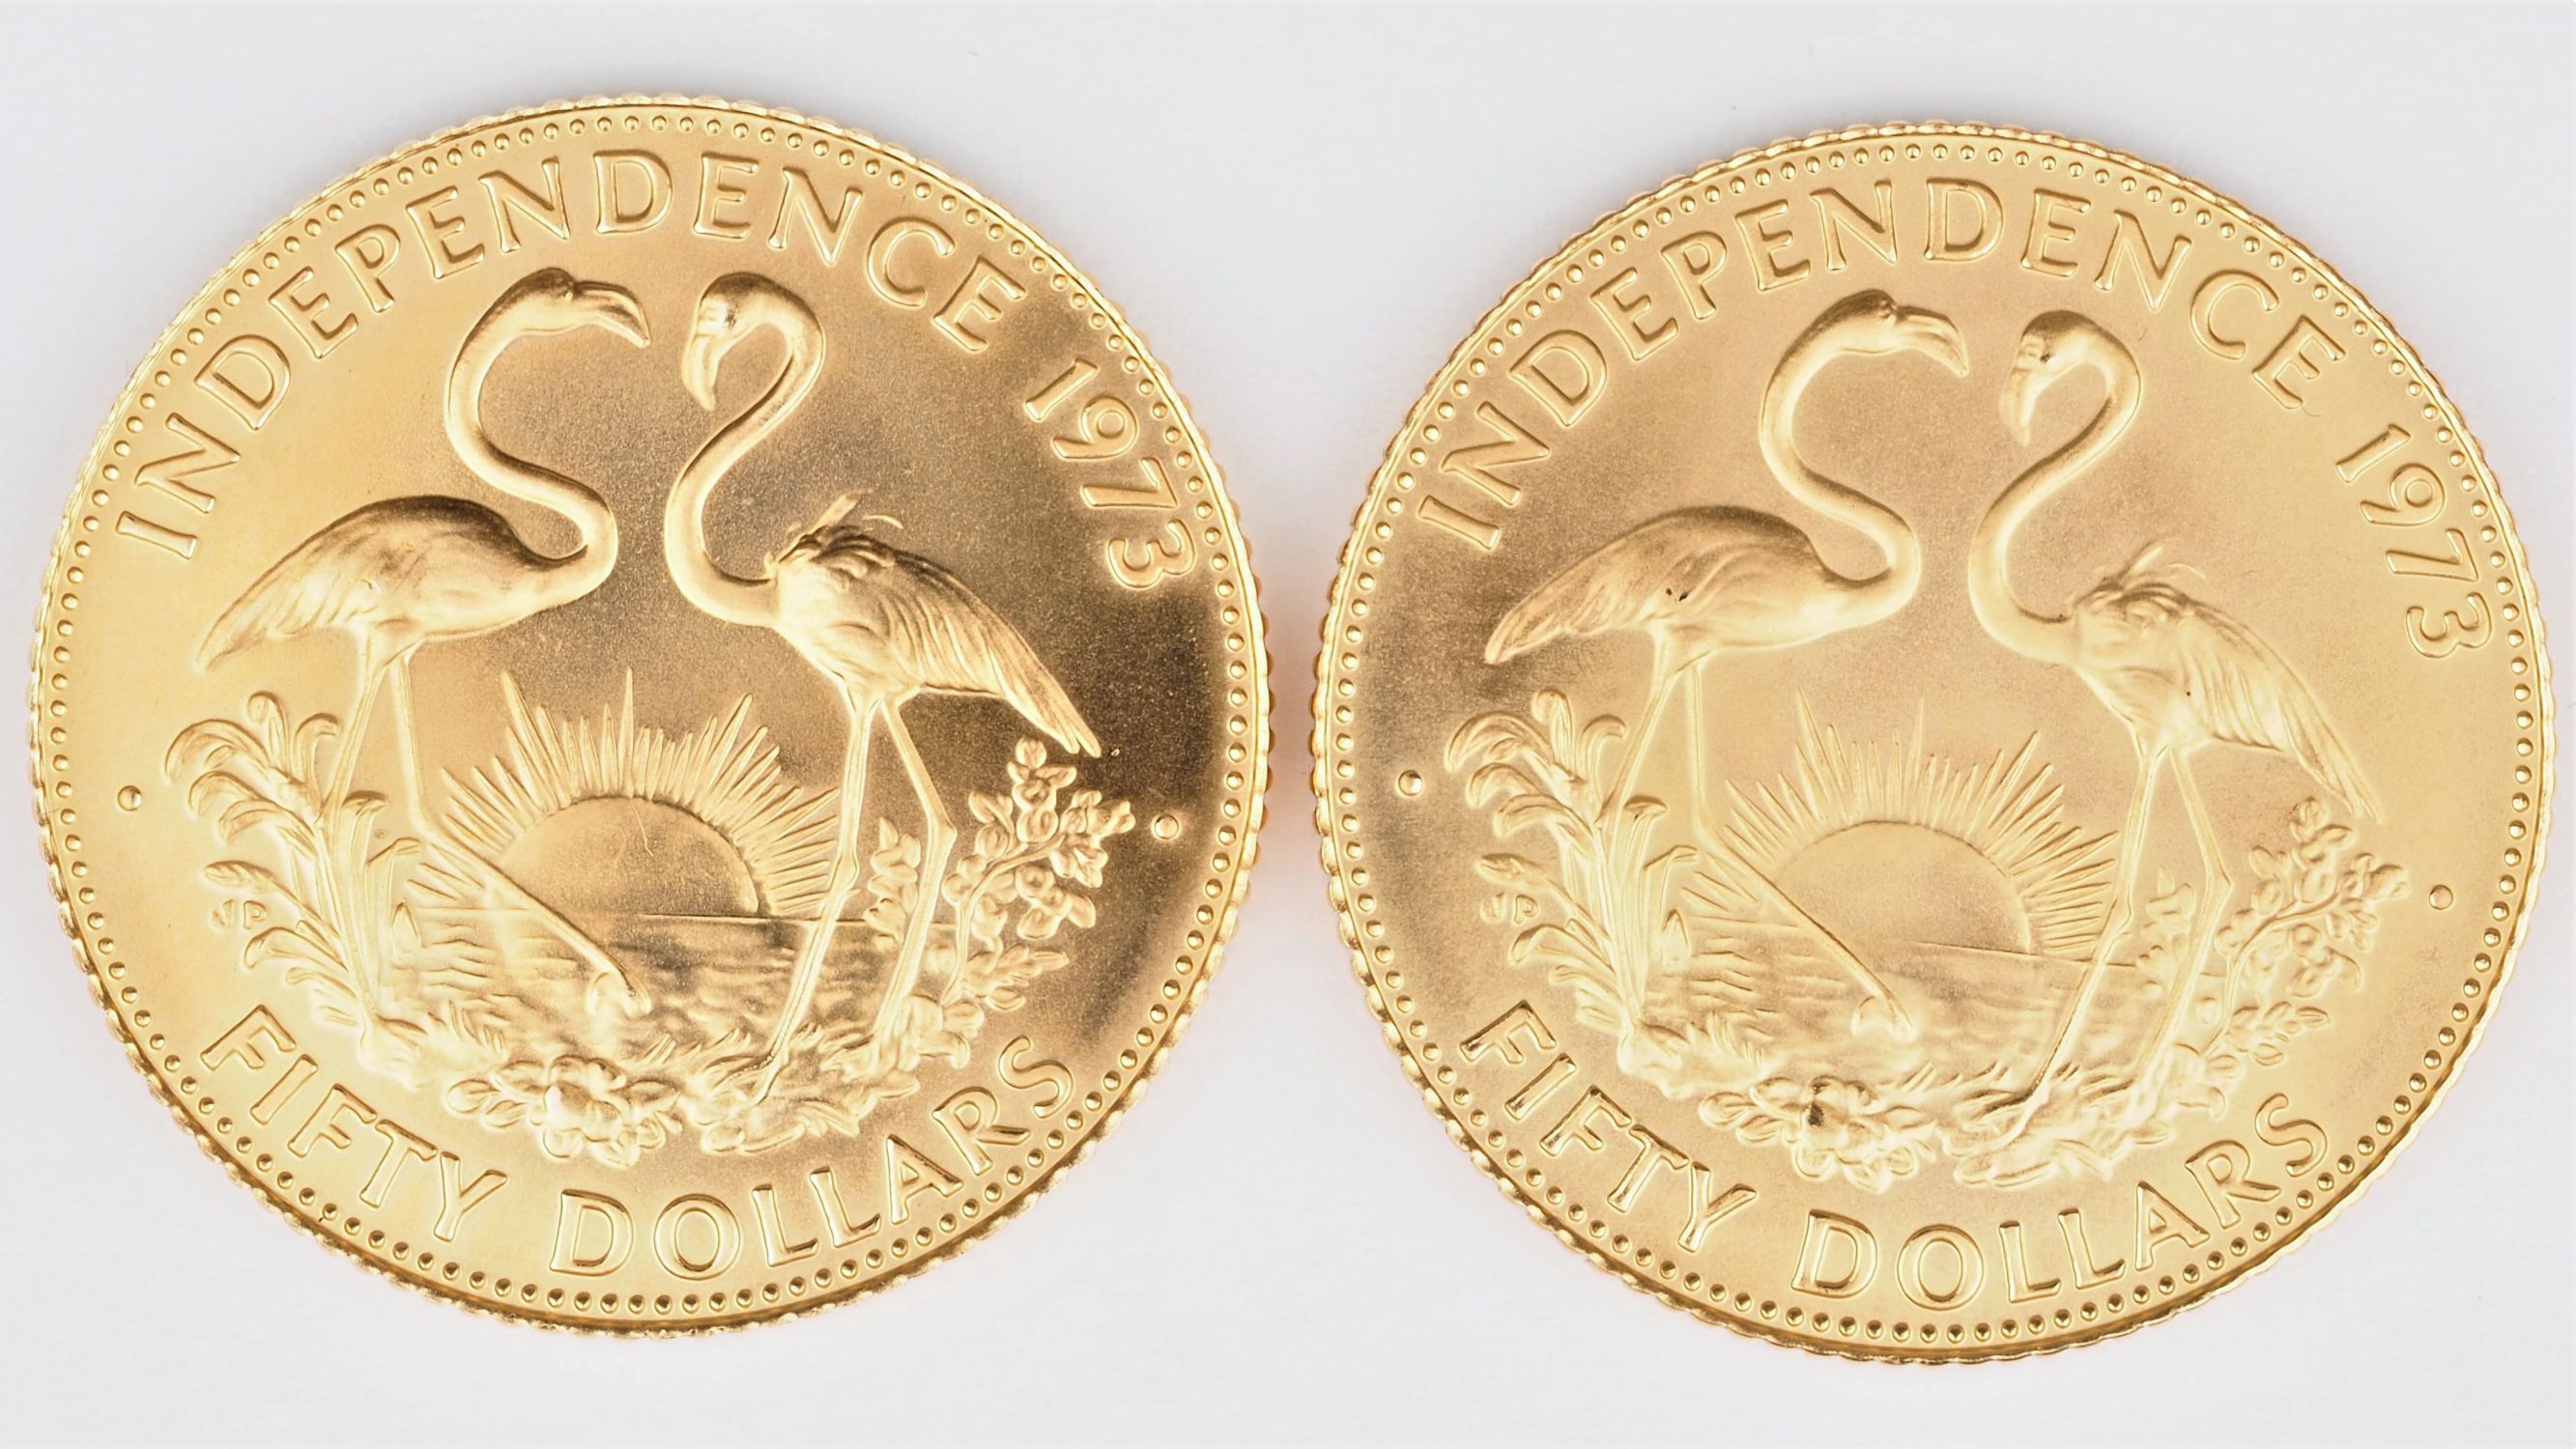 Gold coins Bahamas 50 Dollars "Independence 1973 - Image 2 of 3